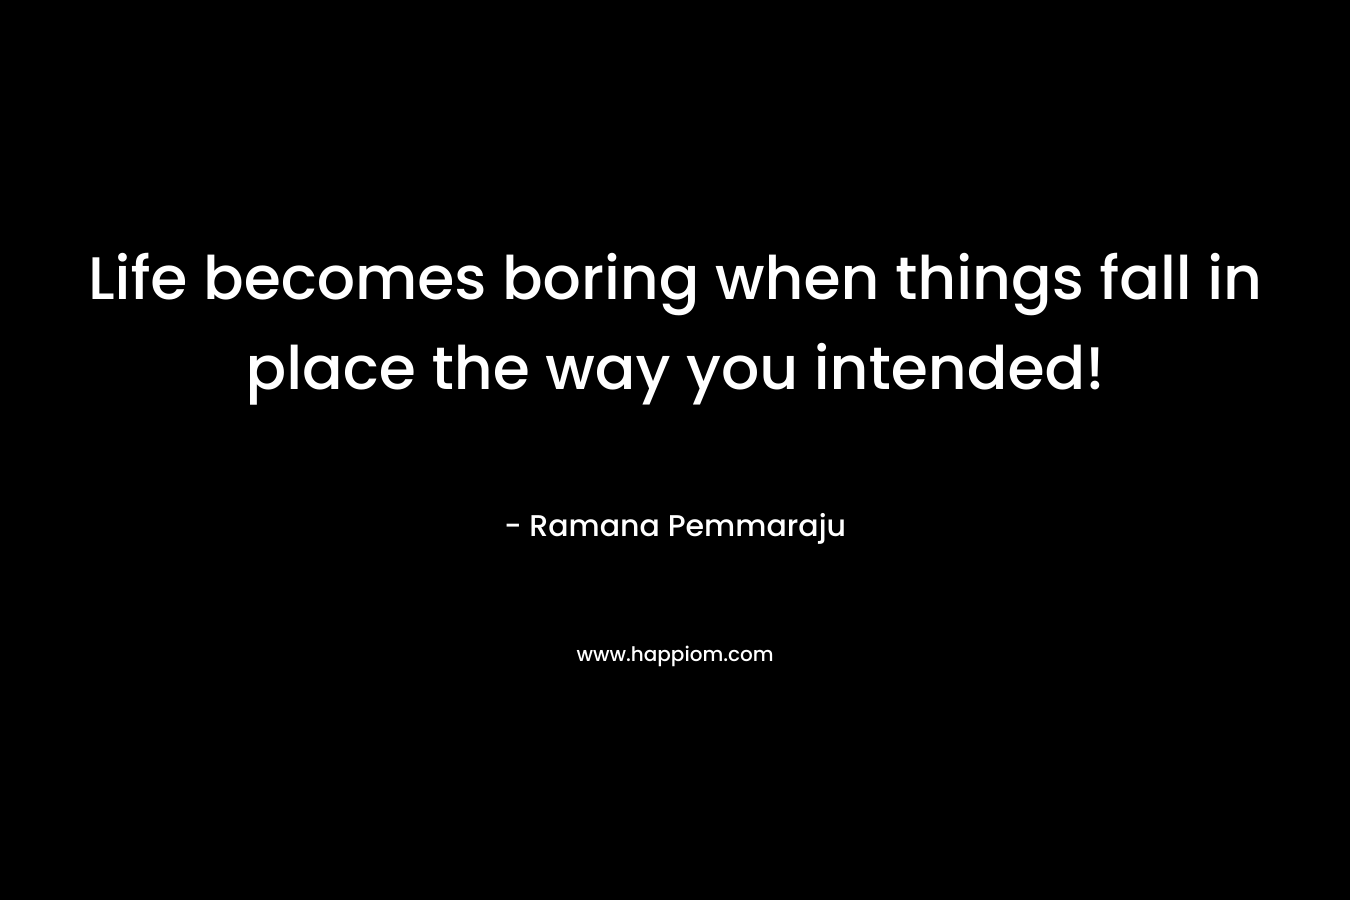 Life becomes boring when things fall in place the way you intended!